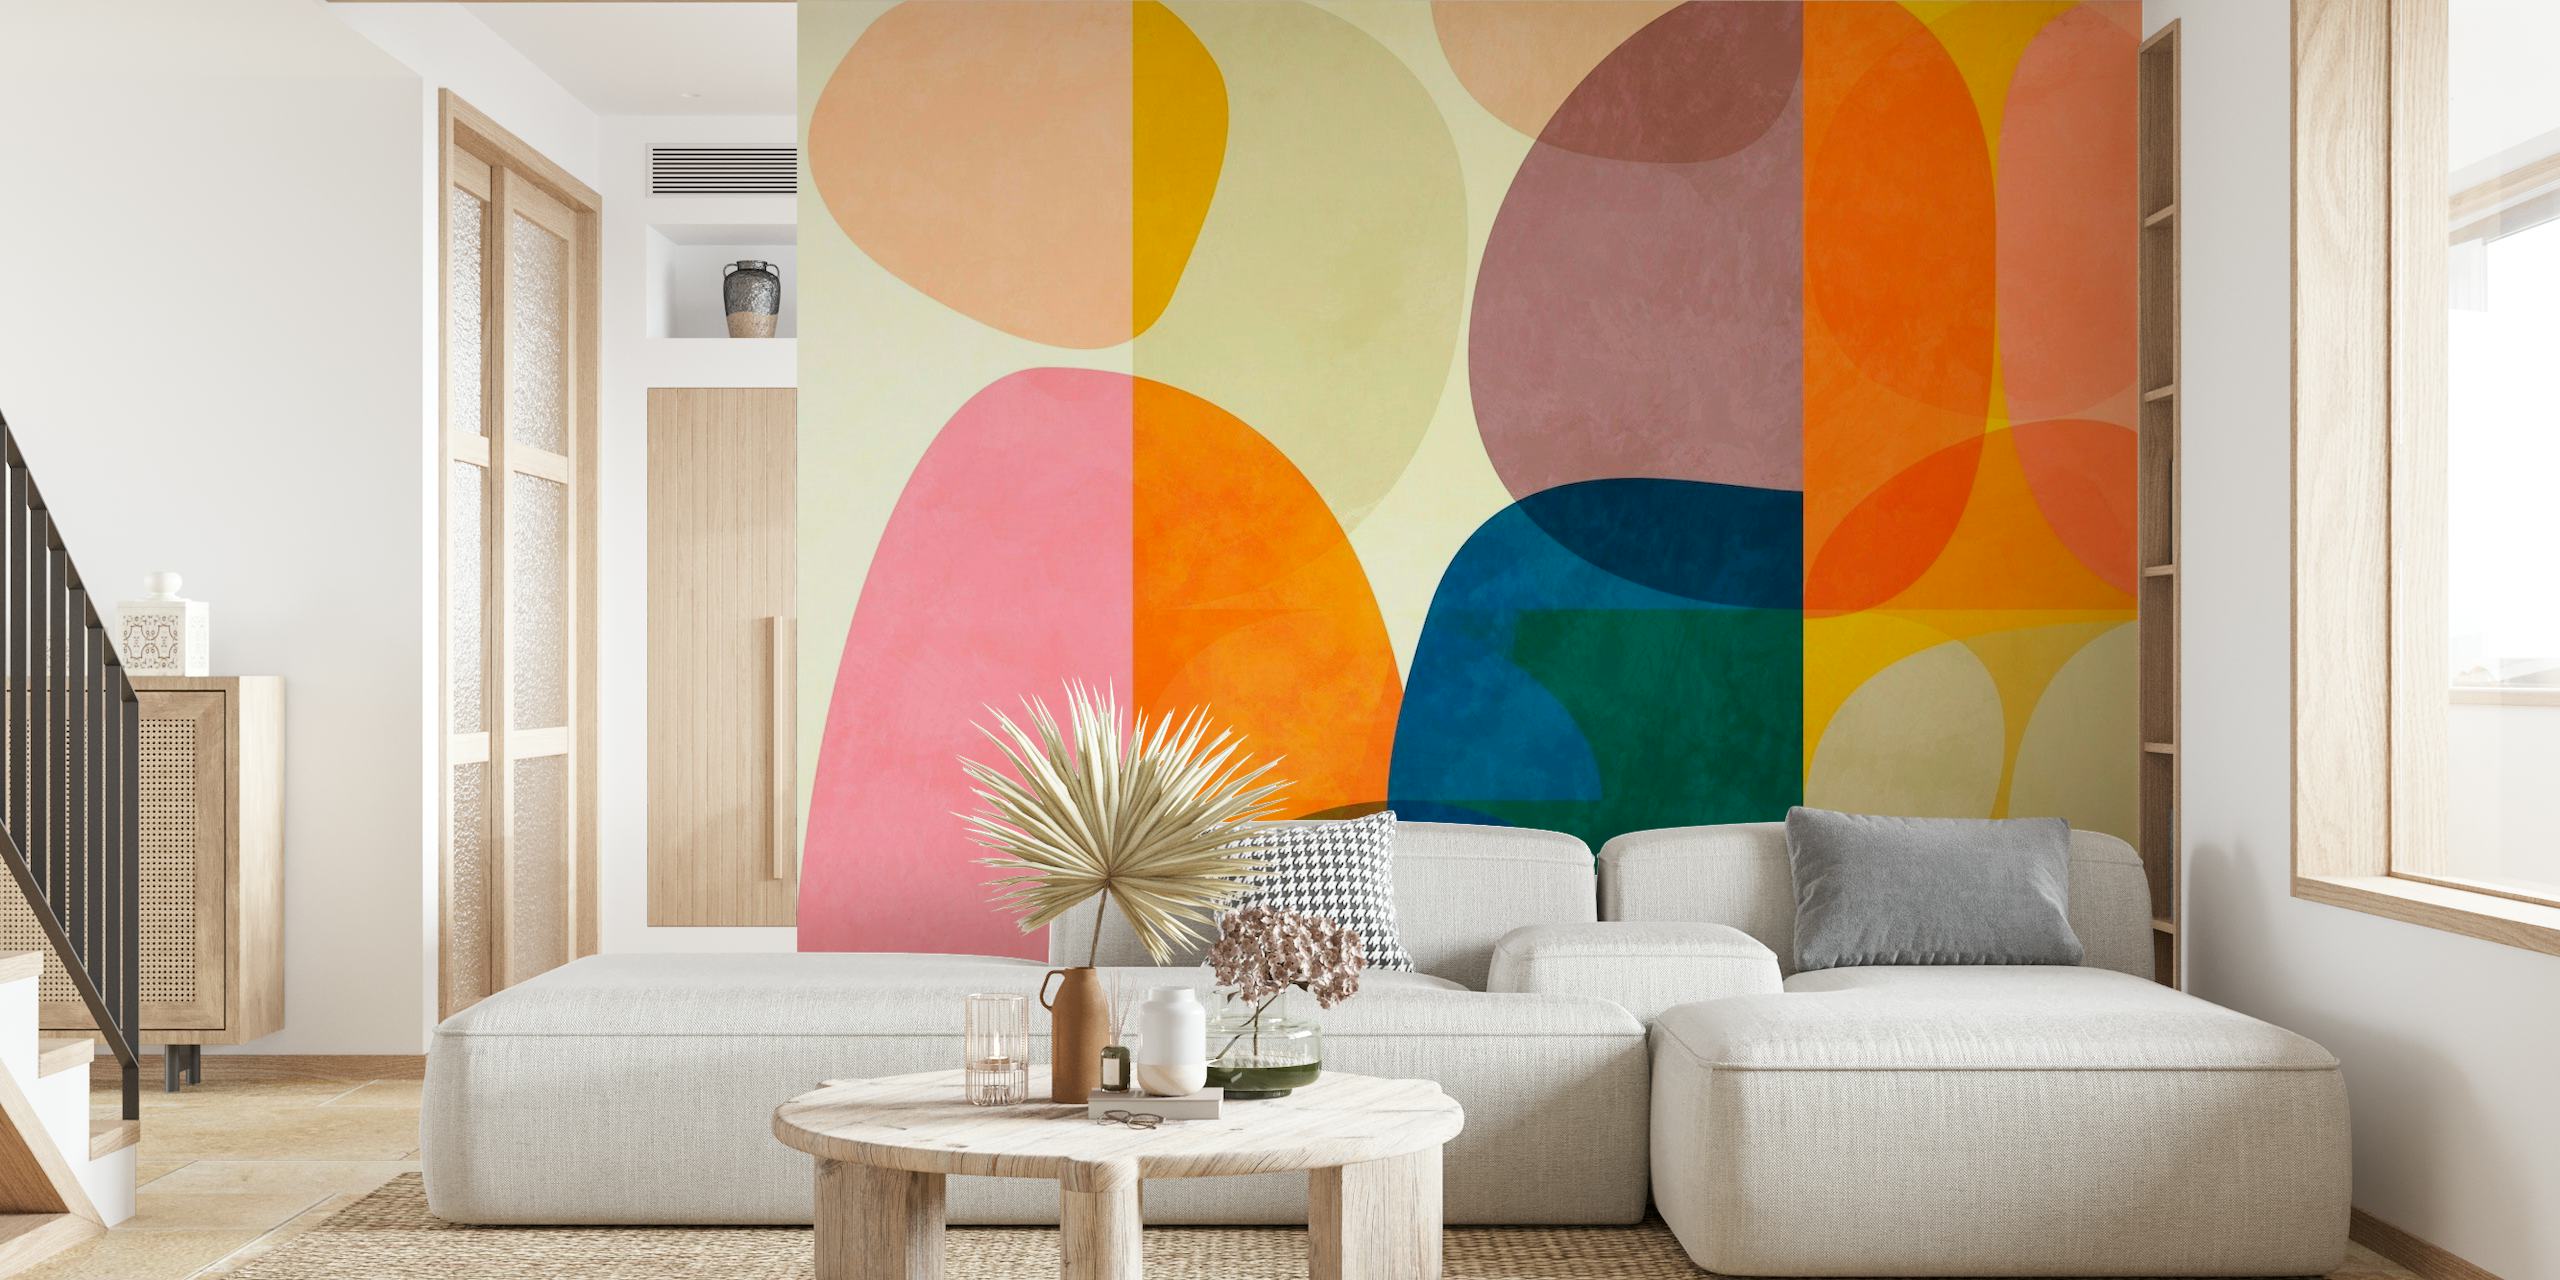 Colorful abstract art wall mural with overlapping geometric shapes in various tones